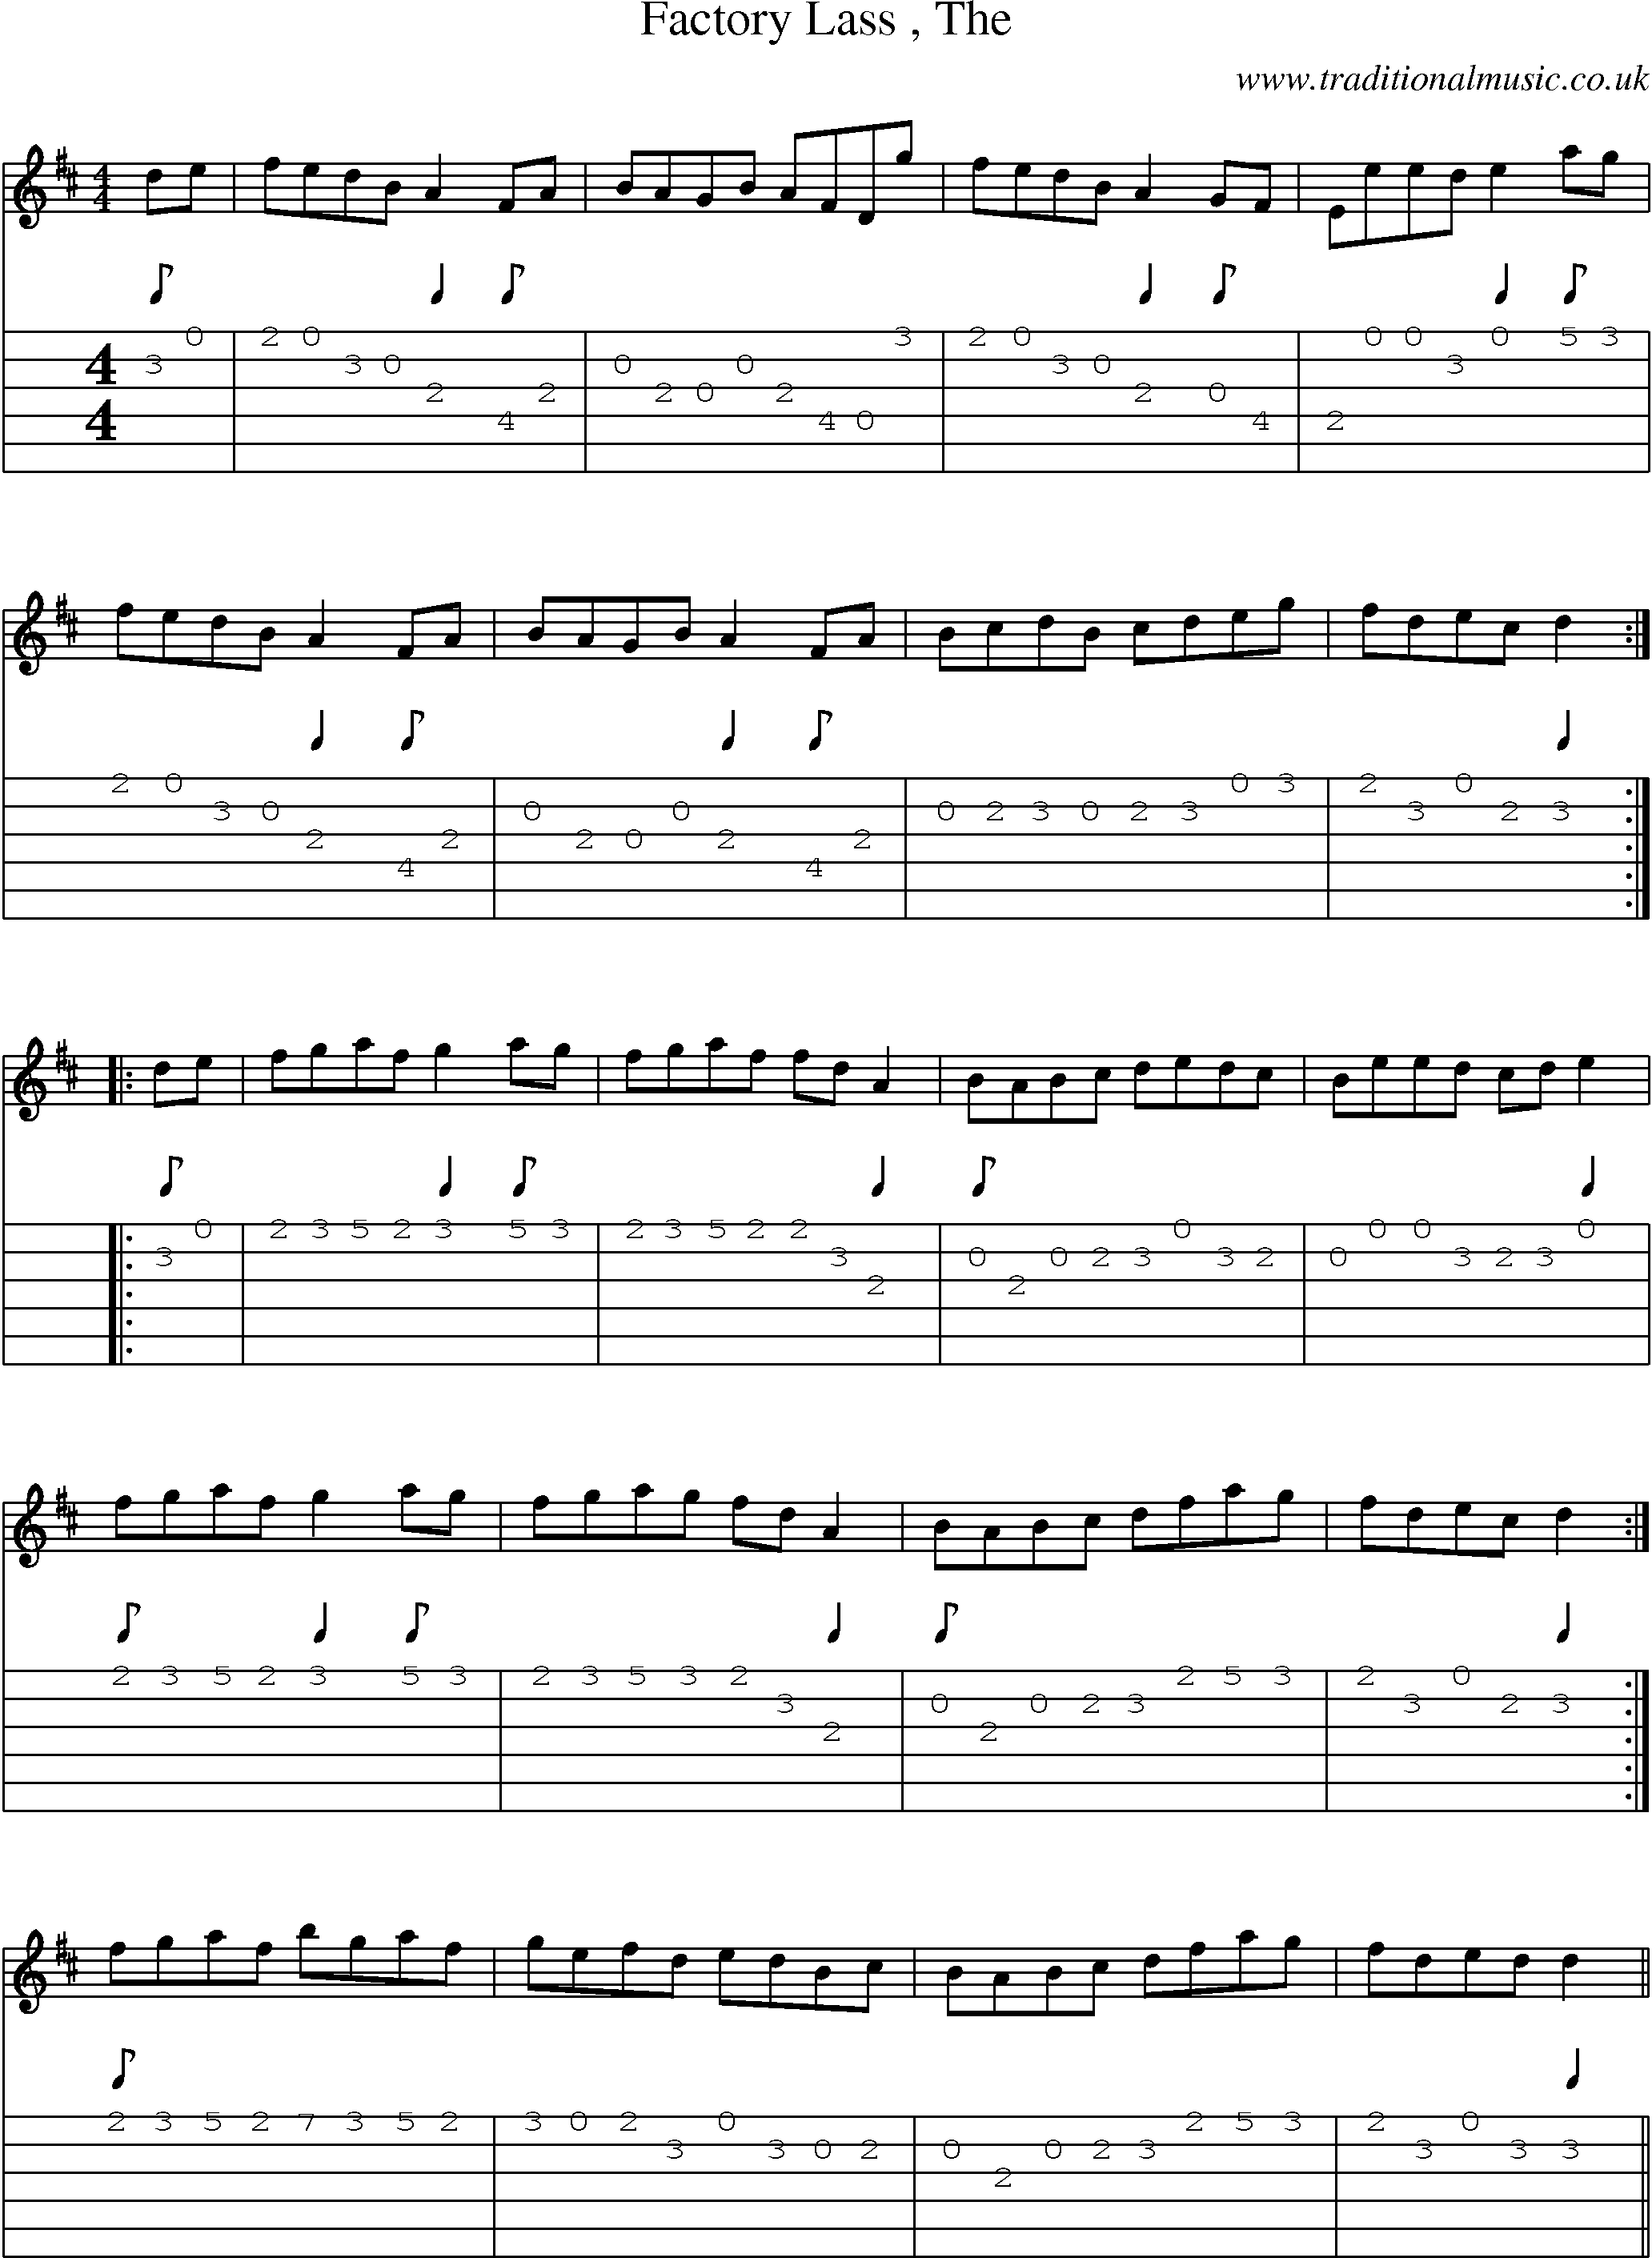 Music Score and Guitar Tabs for Factory Lass